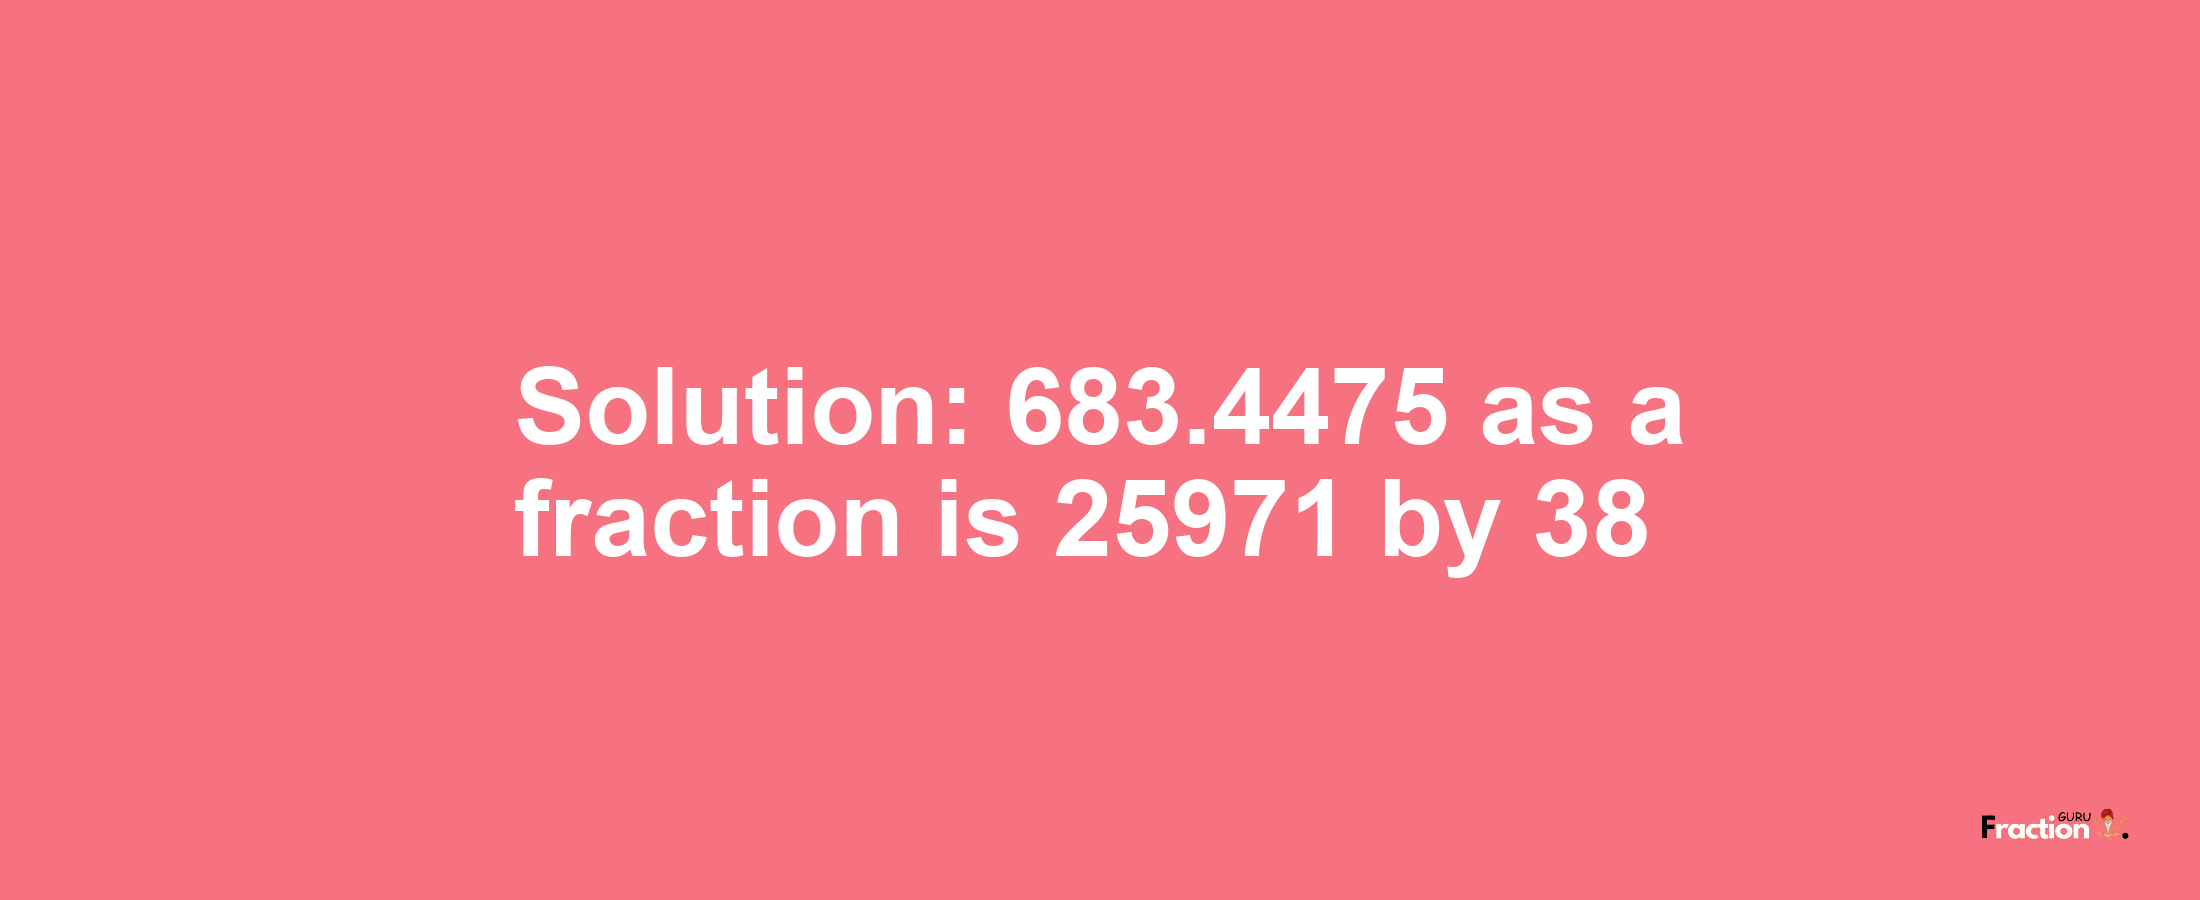 Solution:683.4475 as a fraction is 25971/38